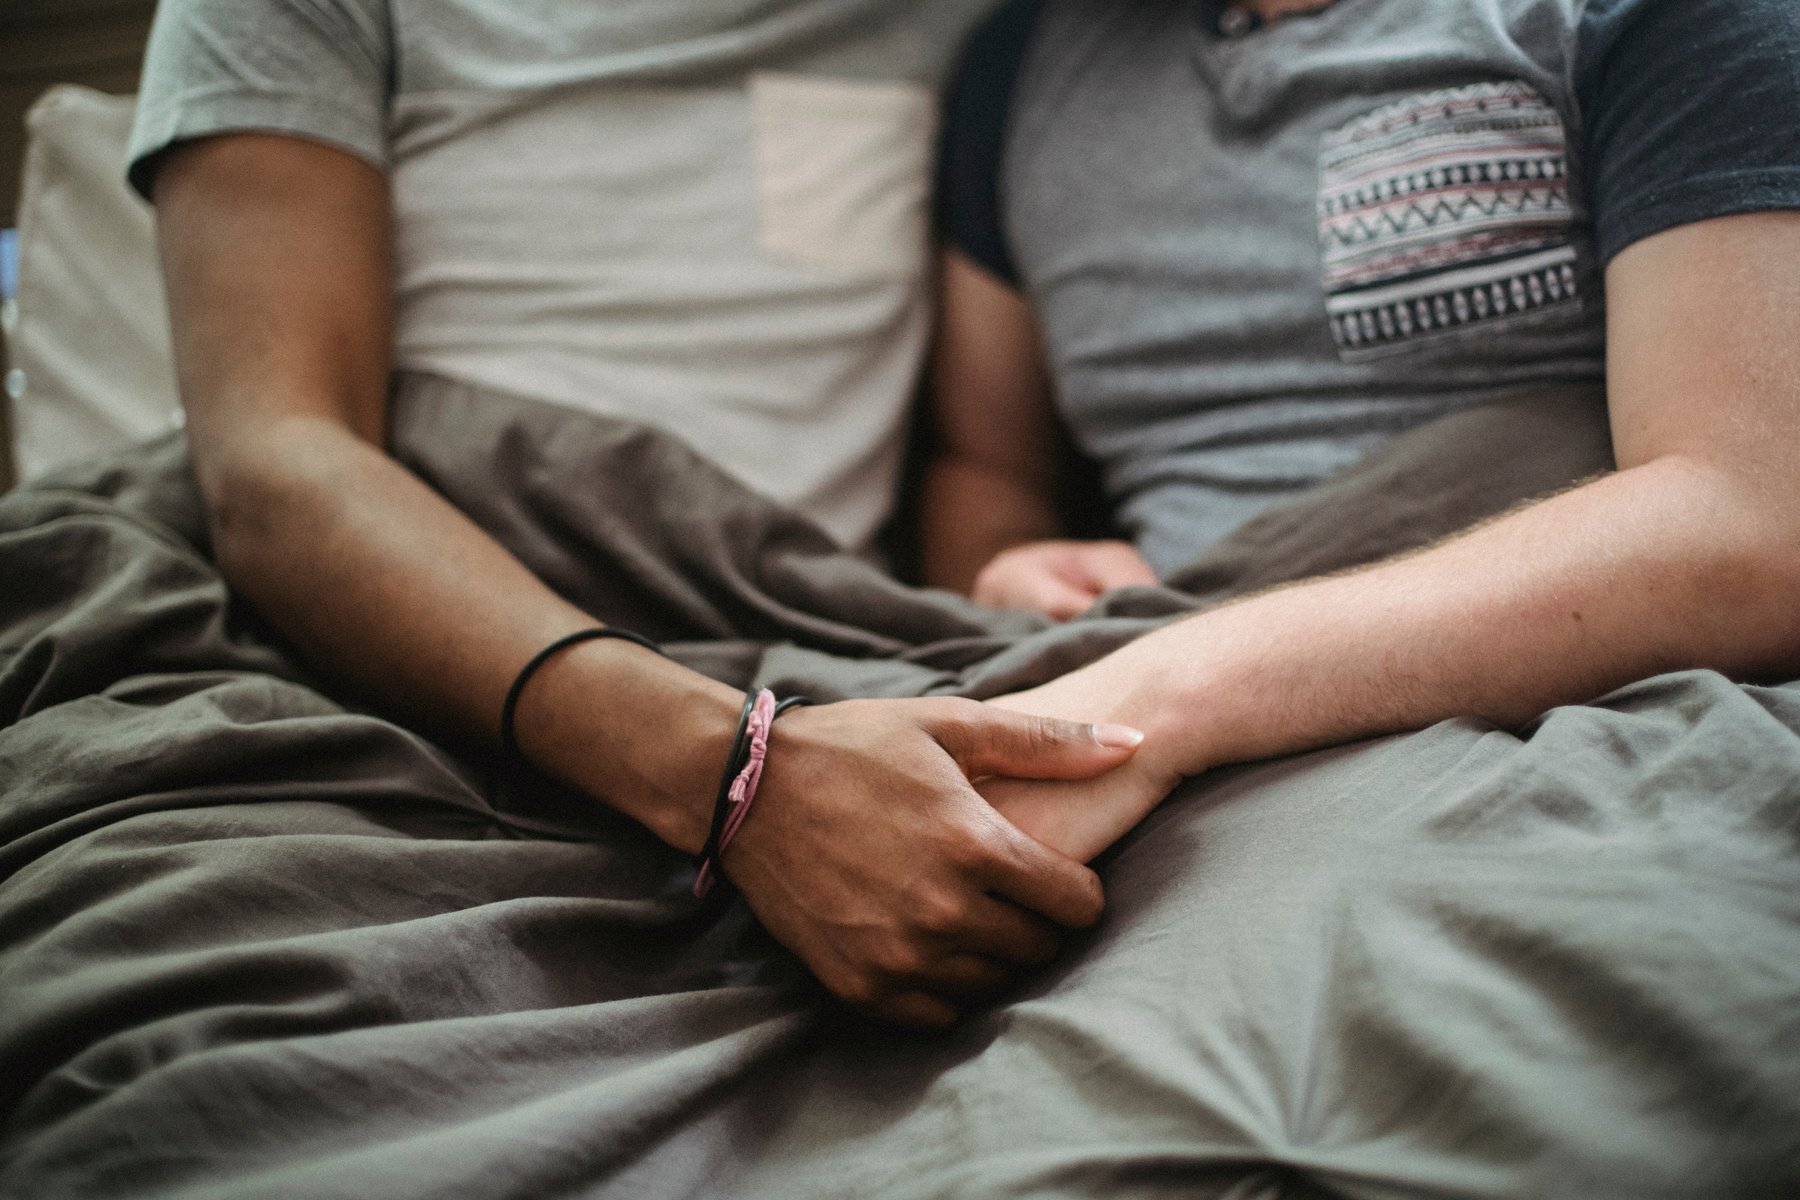 Two Men in Bed Holding Hands